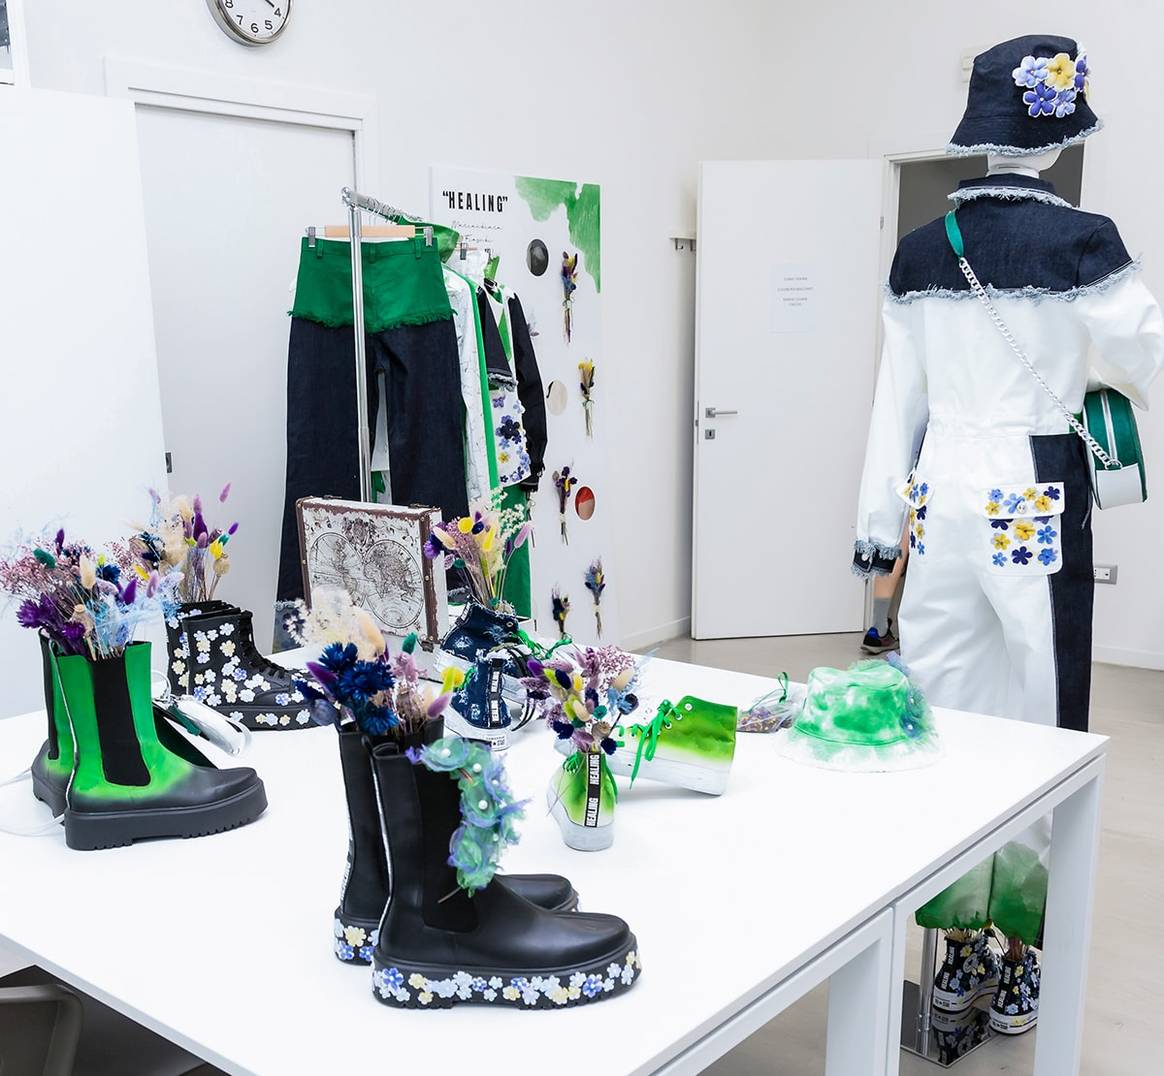 In pictures: Istituto Modartech’ students show graduate collections